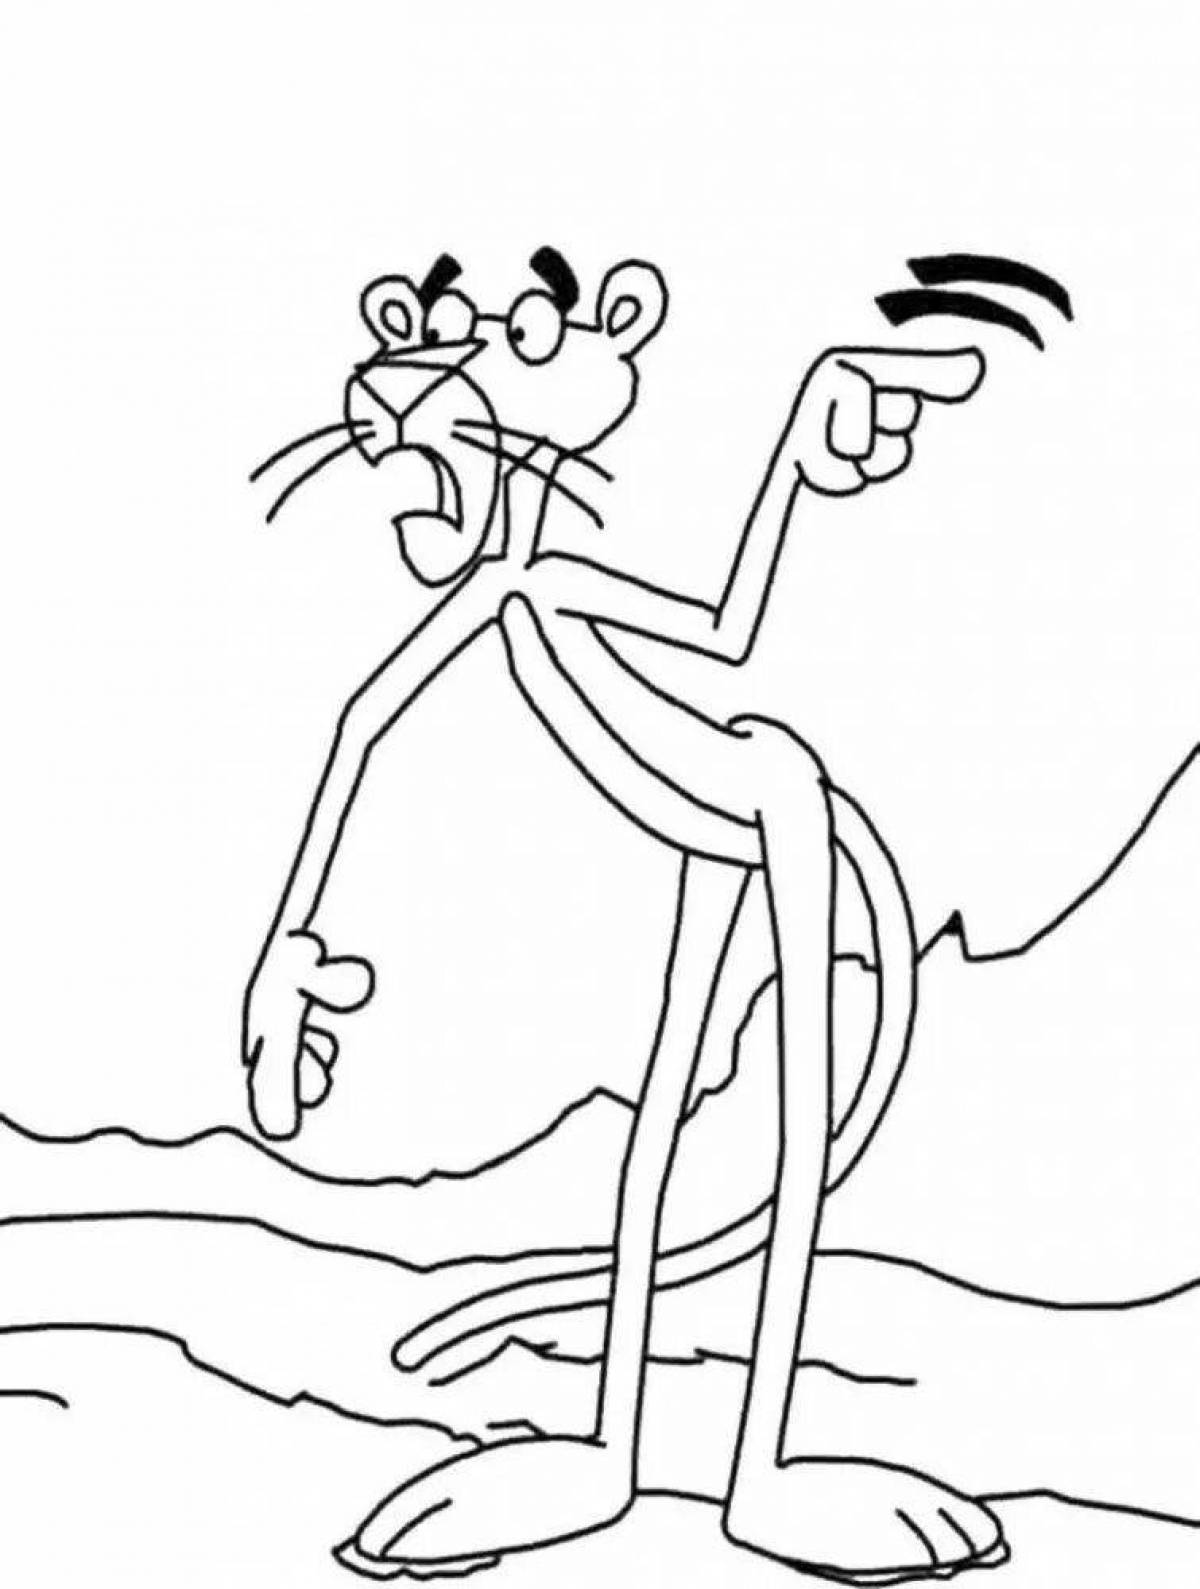 Coloring page nice pink panther